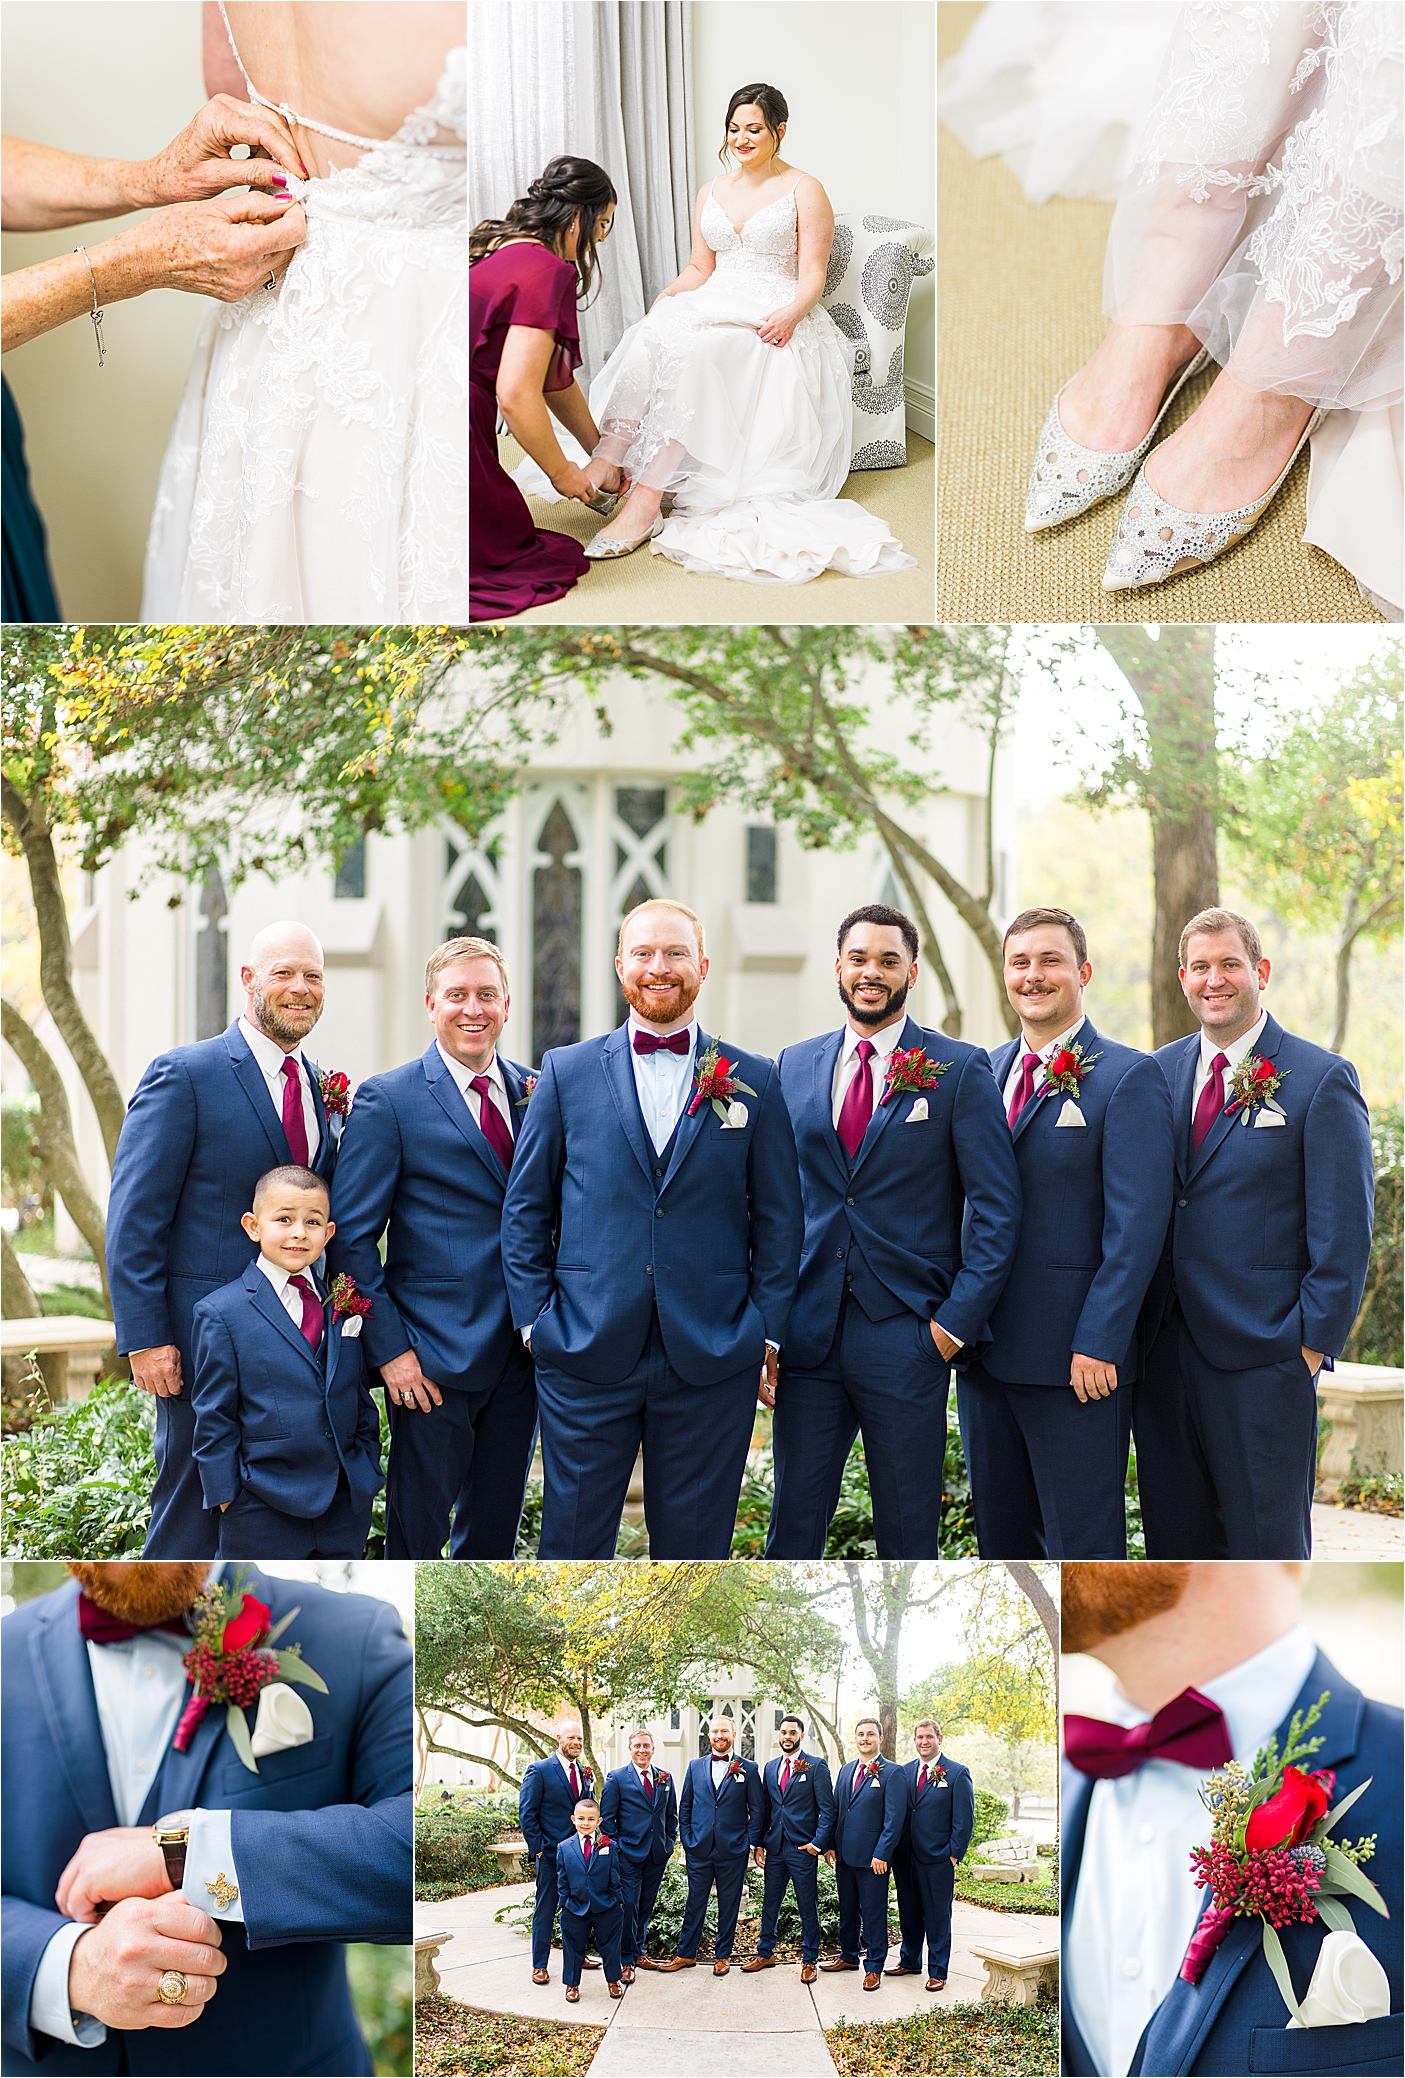 A close up of the mother of the bride's hands as she zips up the brides dress and another image of the groom fixing his cufflinks and posing with groomsmen in navy suits at Alamo Heights United Methodist Church in San Antonio, Texas 